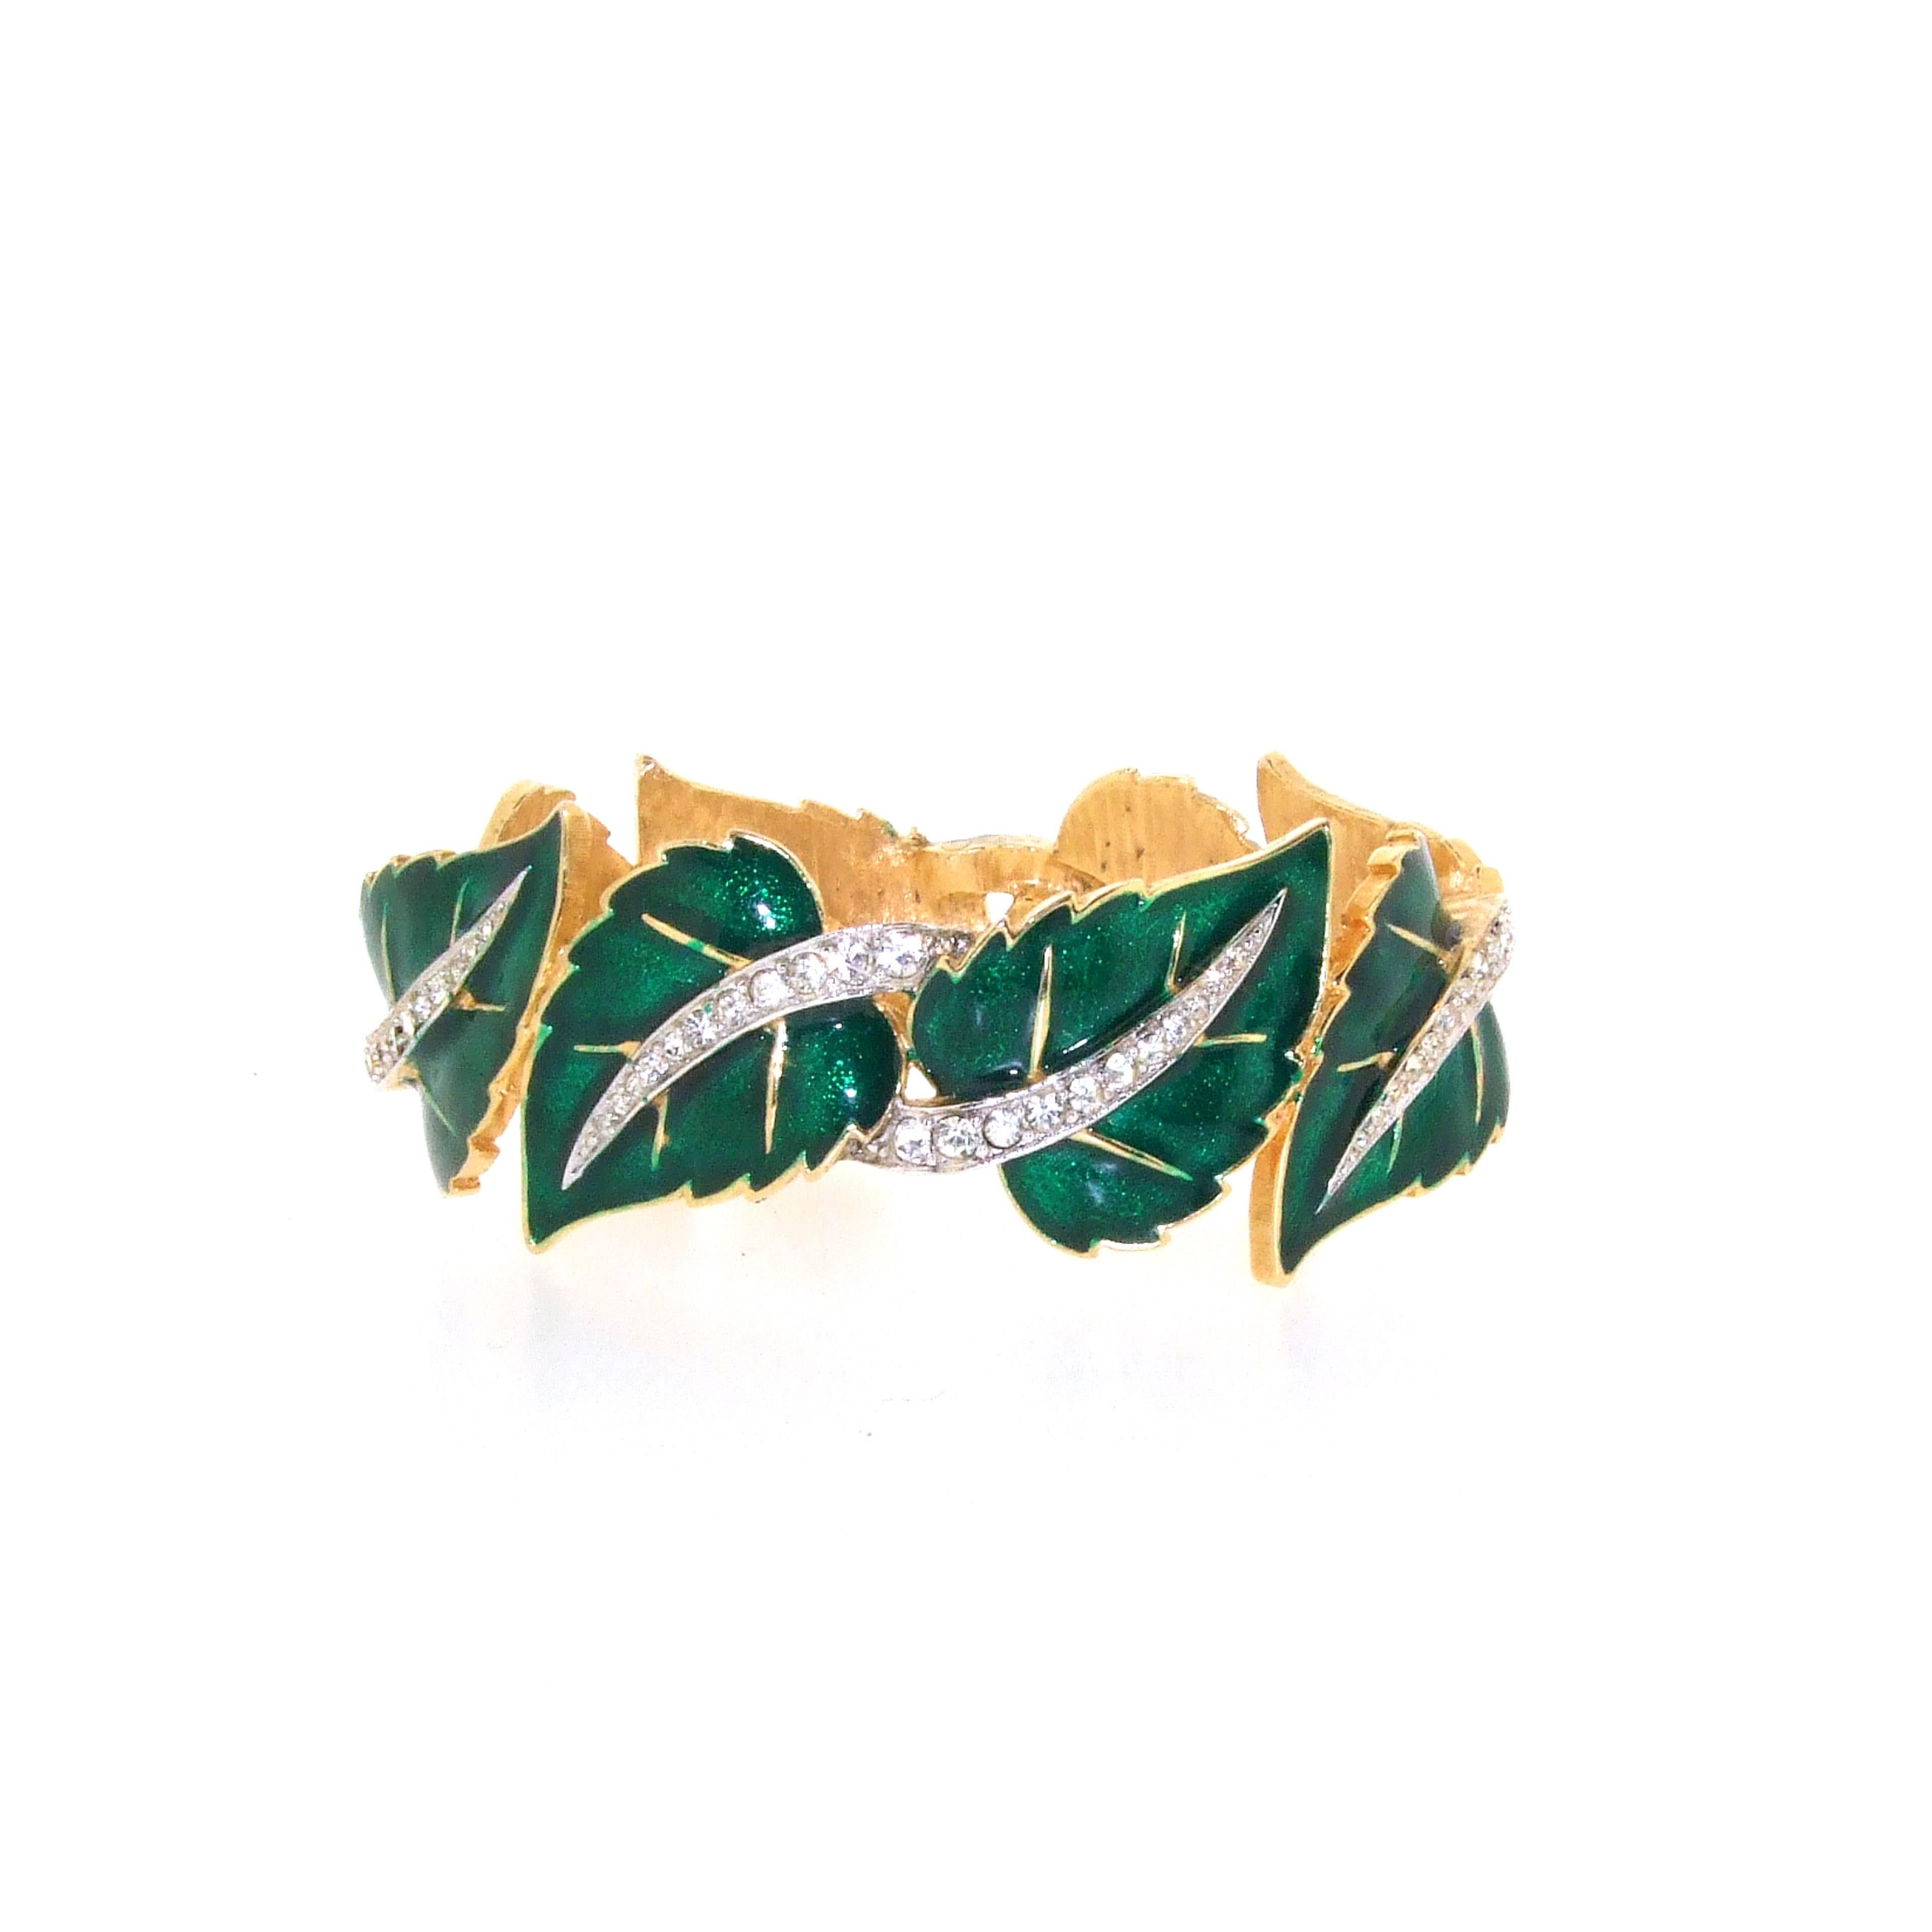 A beautiful clamper bracelet by Jomaz, Joseph Mazer, from the 1950s.
Pretty green enamelled ivy leaves decorated with crystal.

 It measures: 5.9cm wide, 2.1cm high, 7 inches around the wrist.